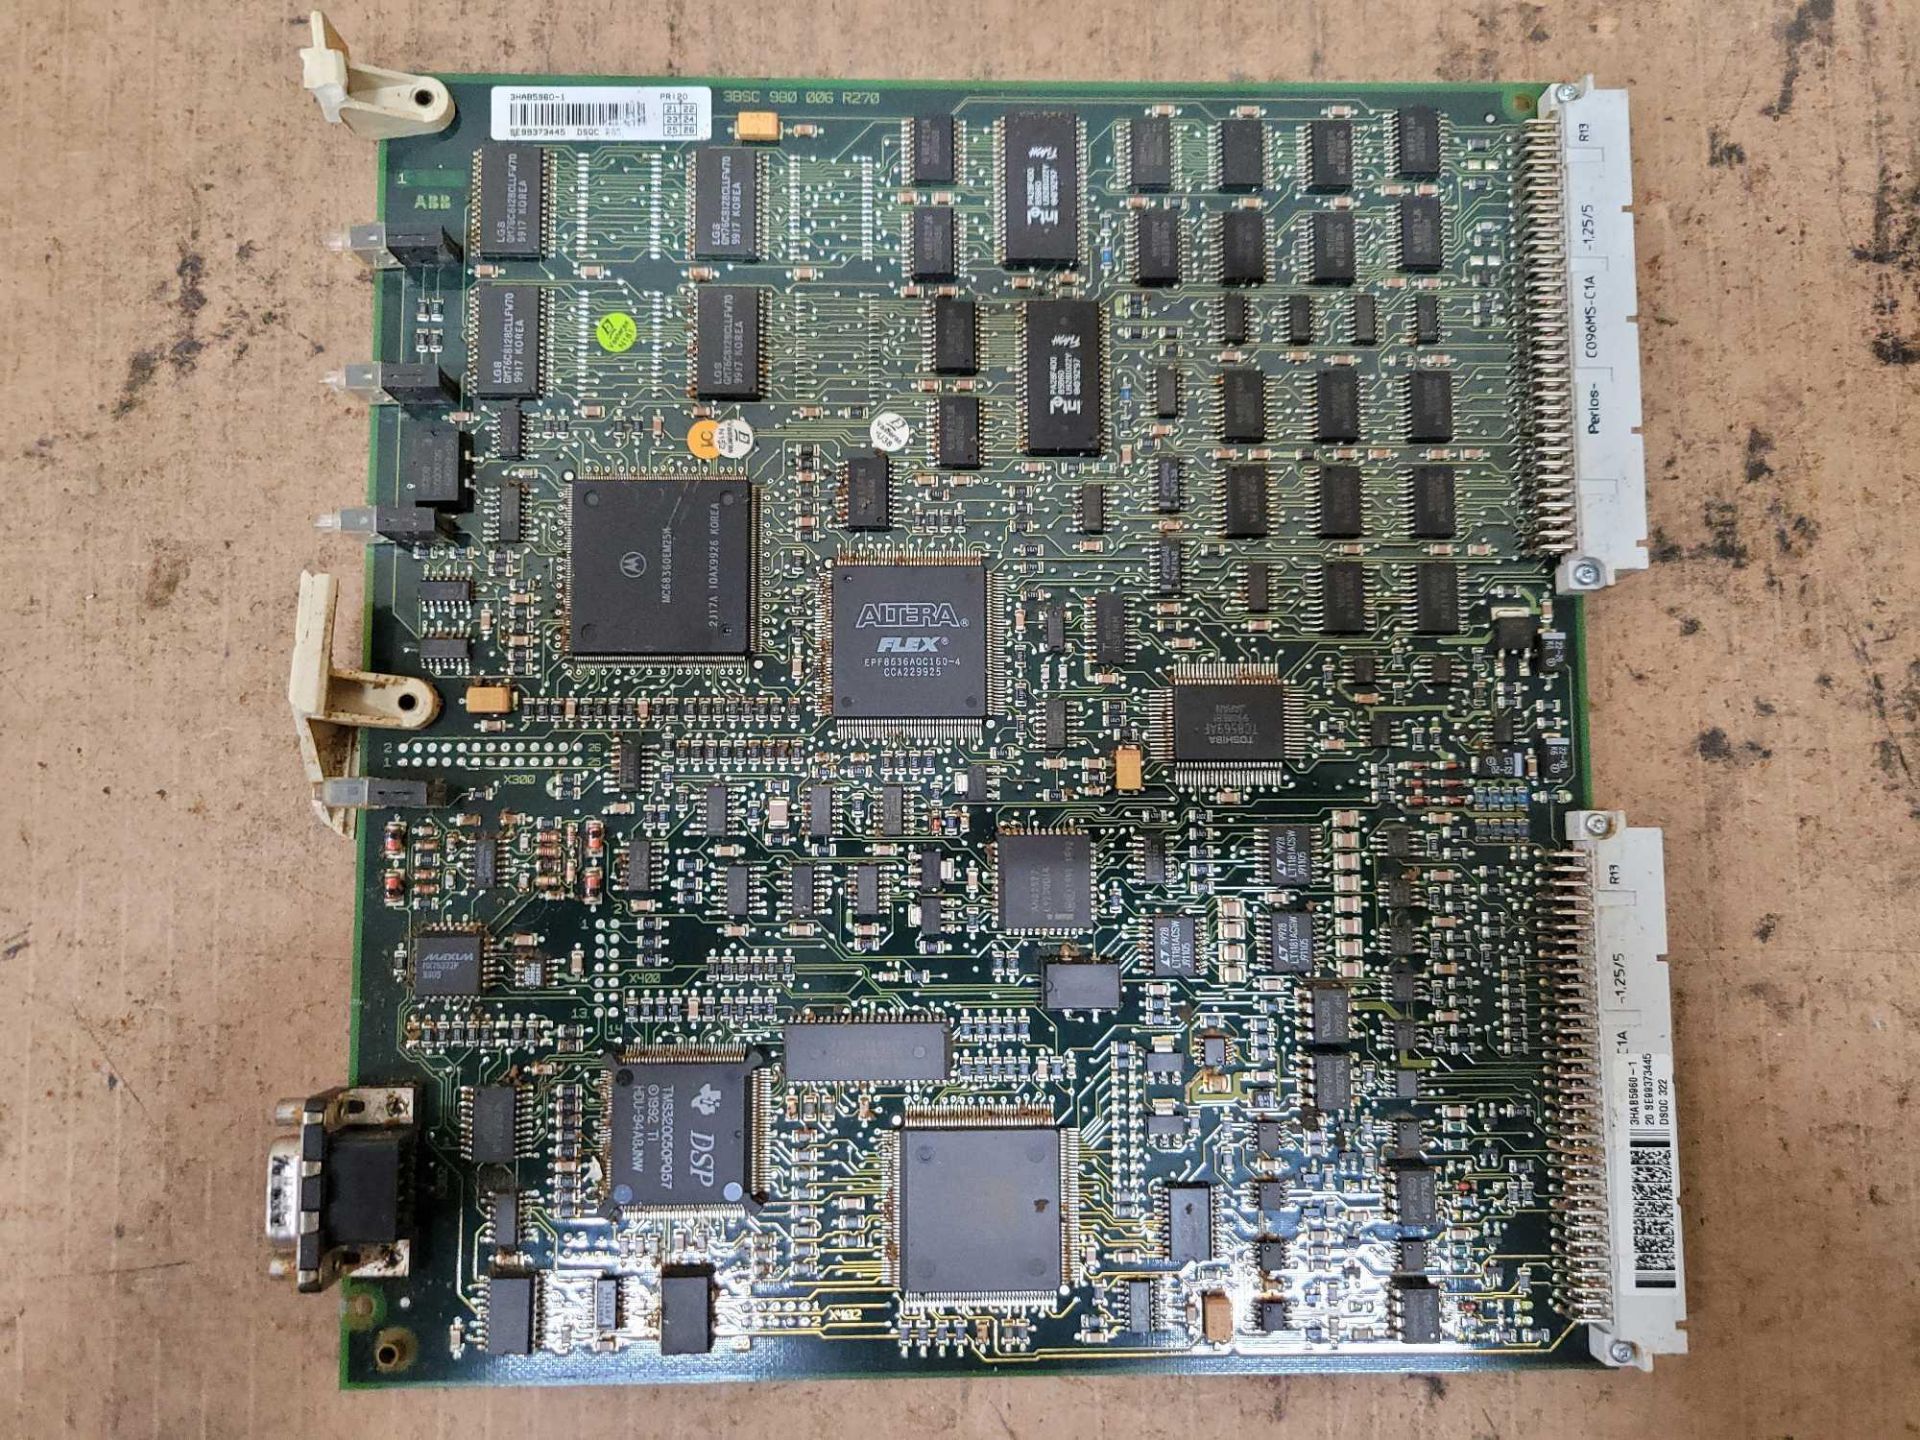 LOT OF 5 ABB 3HAB5960-1 3BSC-980-006-R270 CPU BOARD - Image 2 of 7